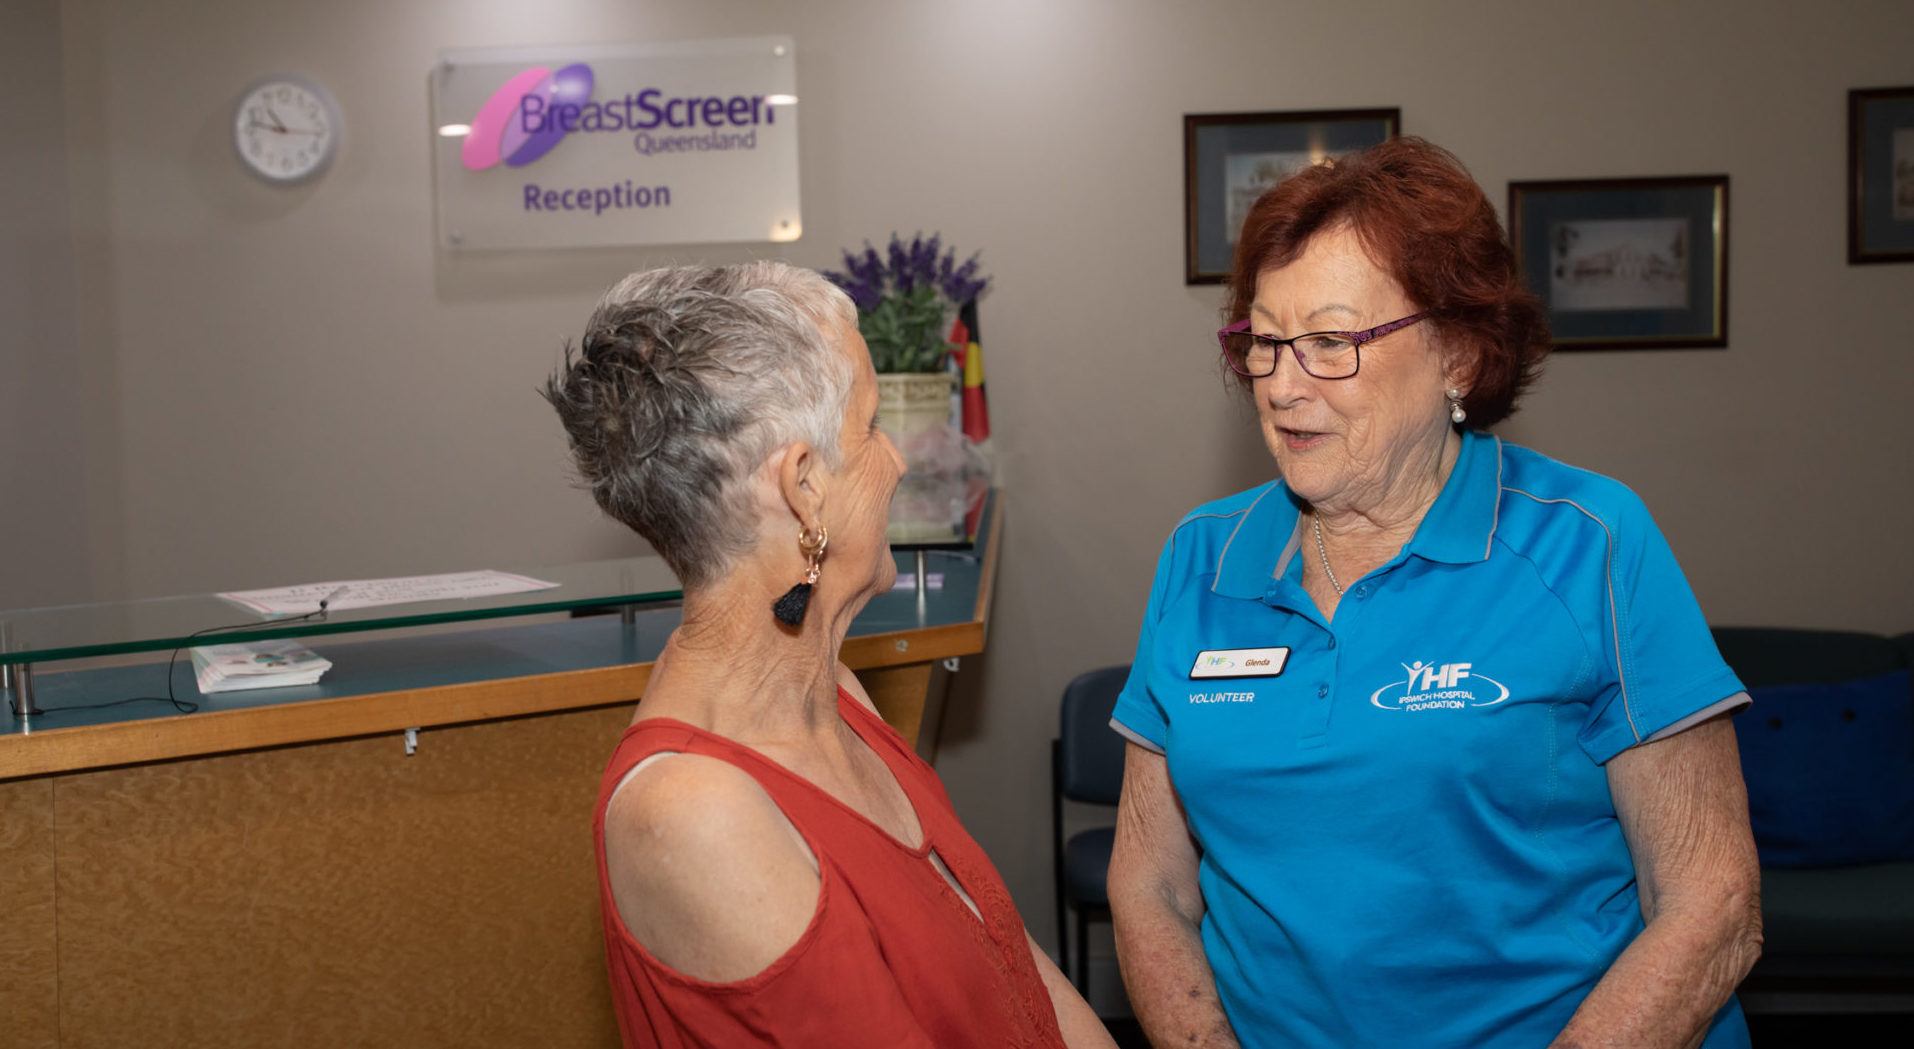 Volunteers offer support at BreastScreen Qld